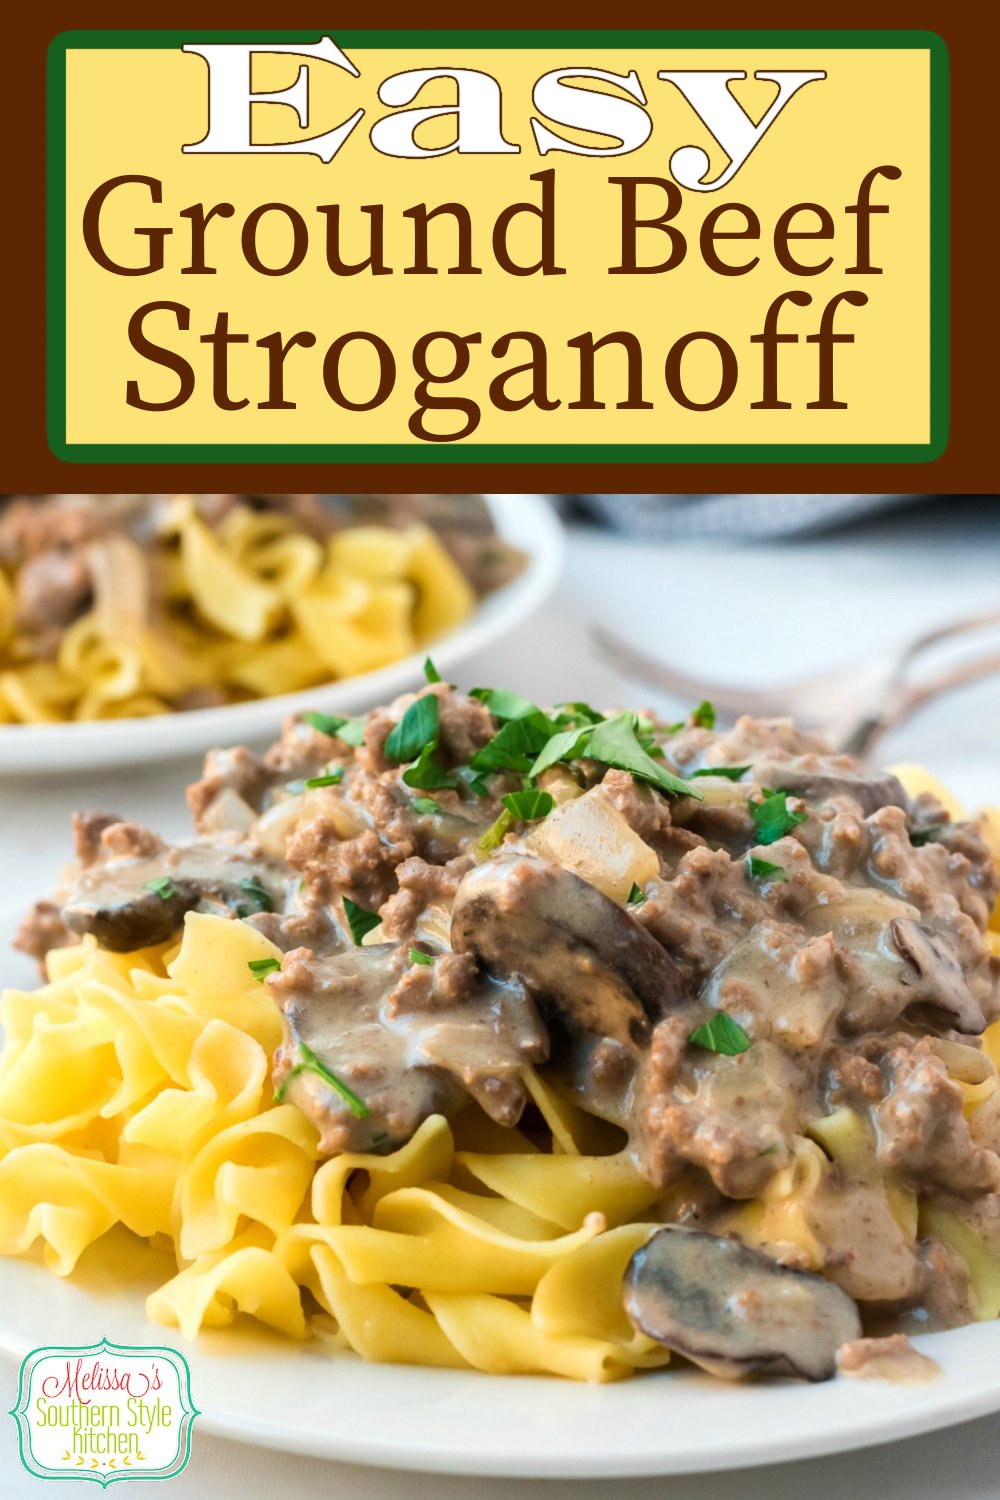 You can enjoy this oh-so-simple Ground Beef Stroganoff for dinner any night of the week #groundbeefstroganoff #beefstroganoff #easygroundbeefrecipes #dinner #dinnerideas #stroganoff #southernfood #soujthernrecipes #beef #mushrooms via @melissasssk